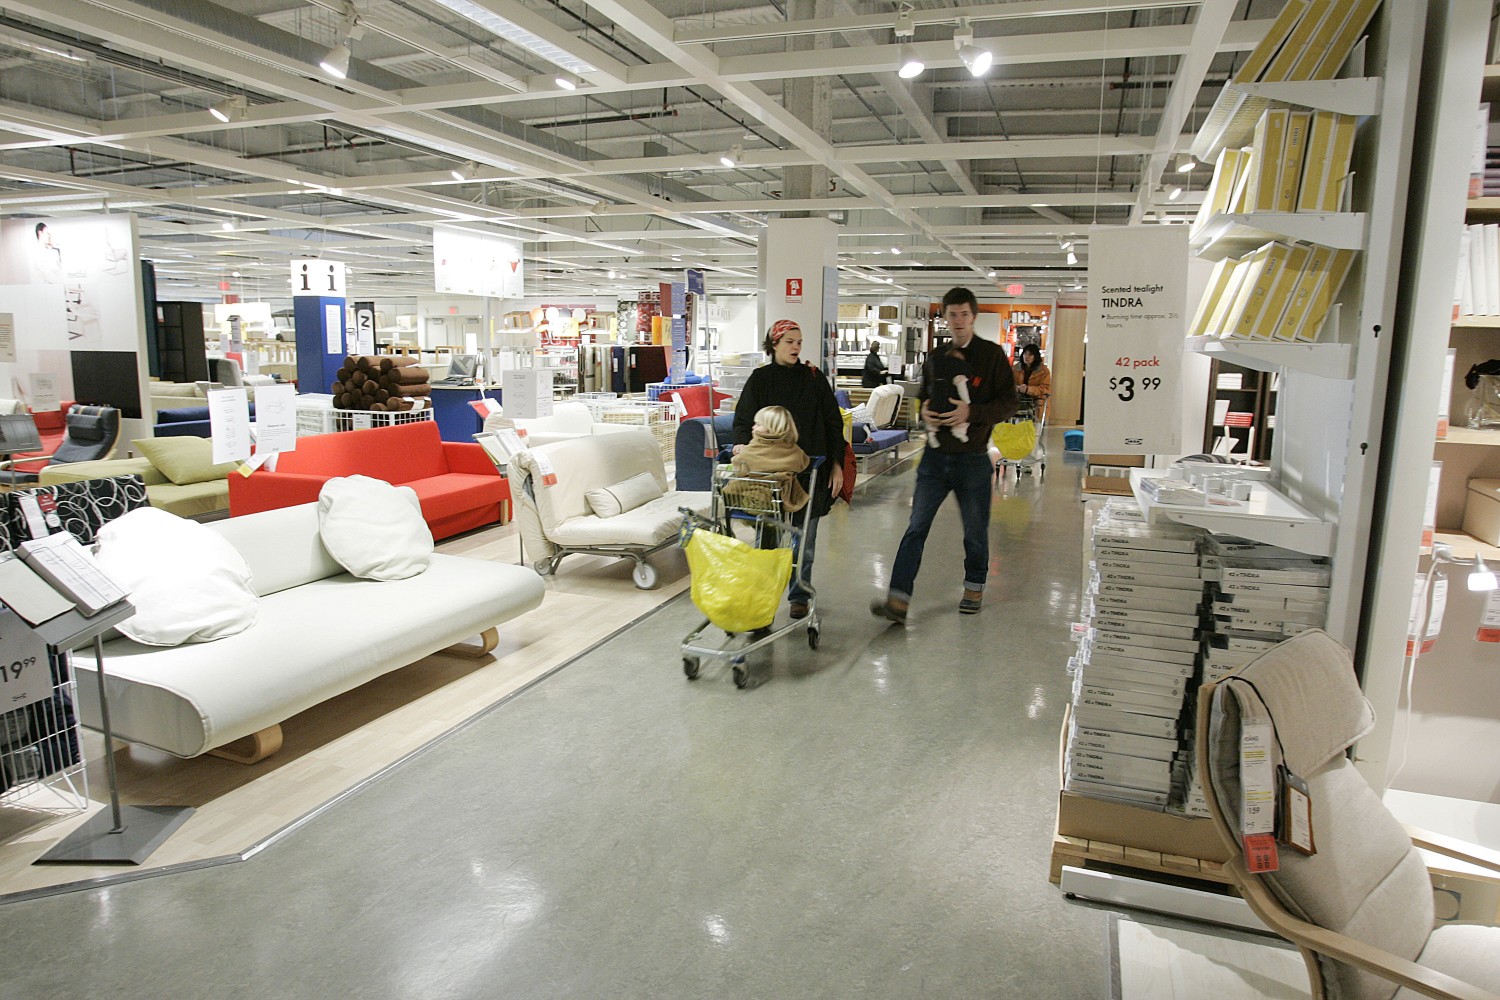 IKEA Plans Expansion In U.S.